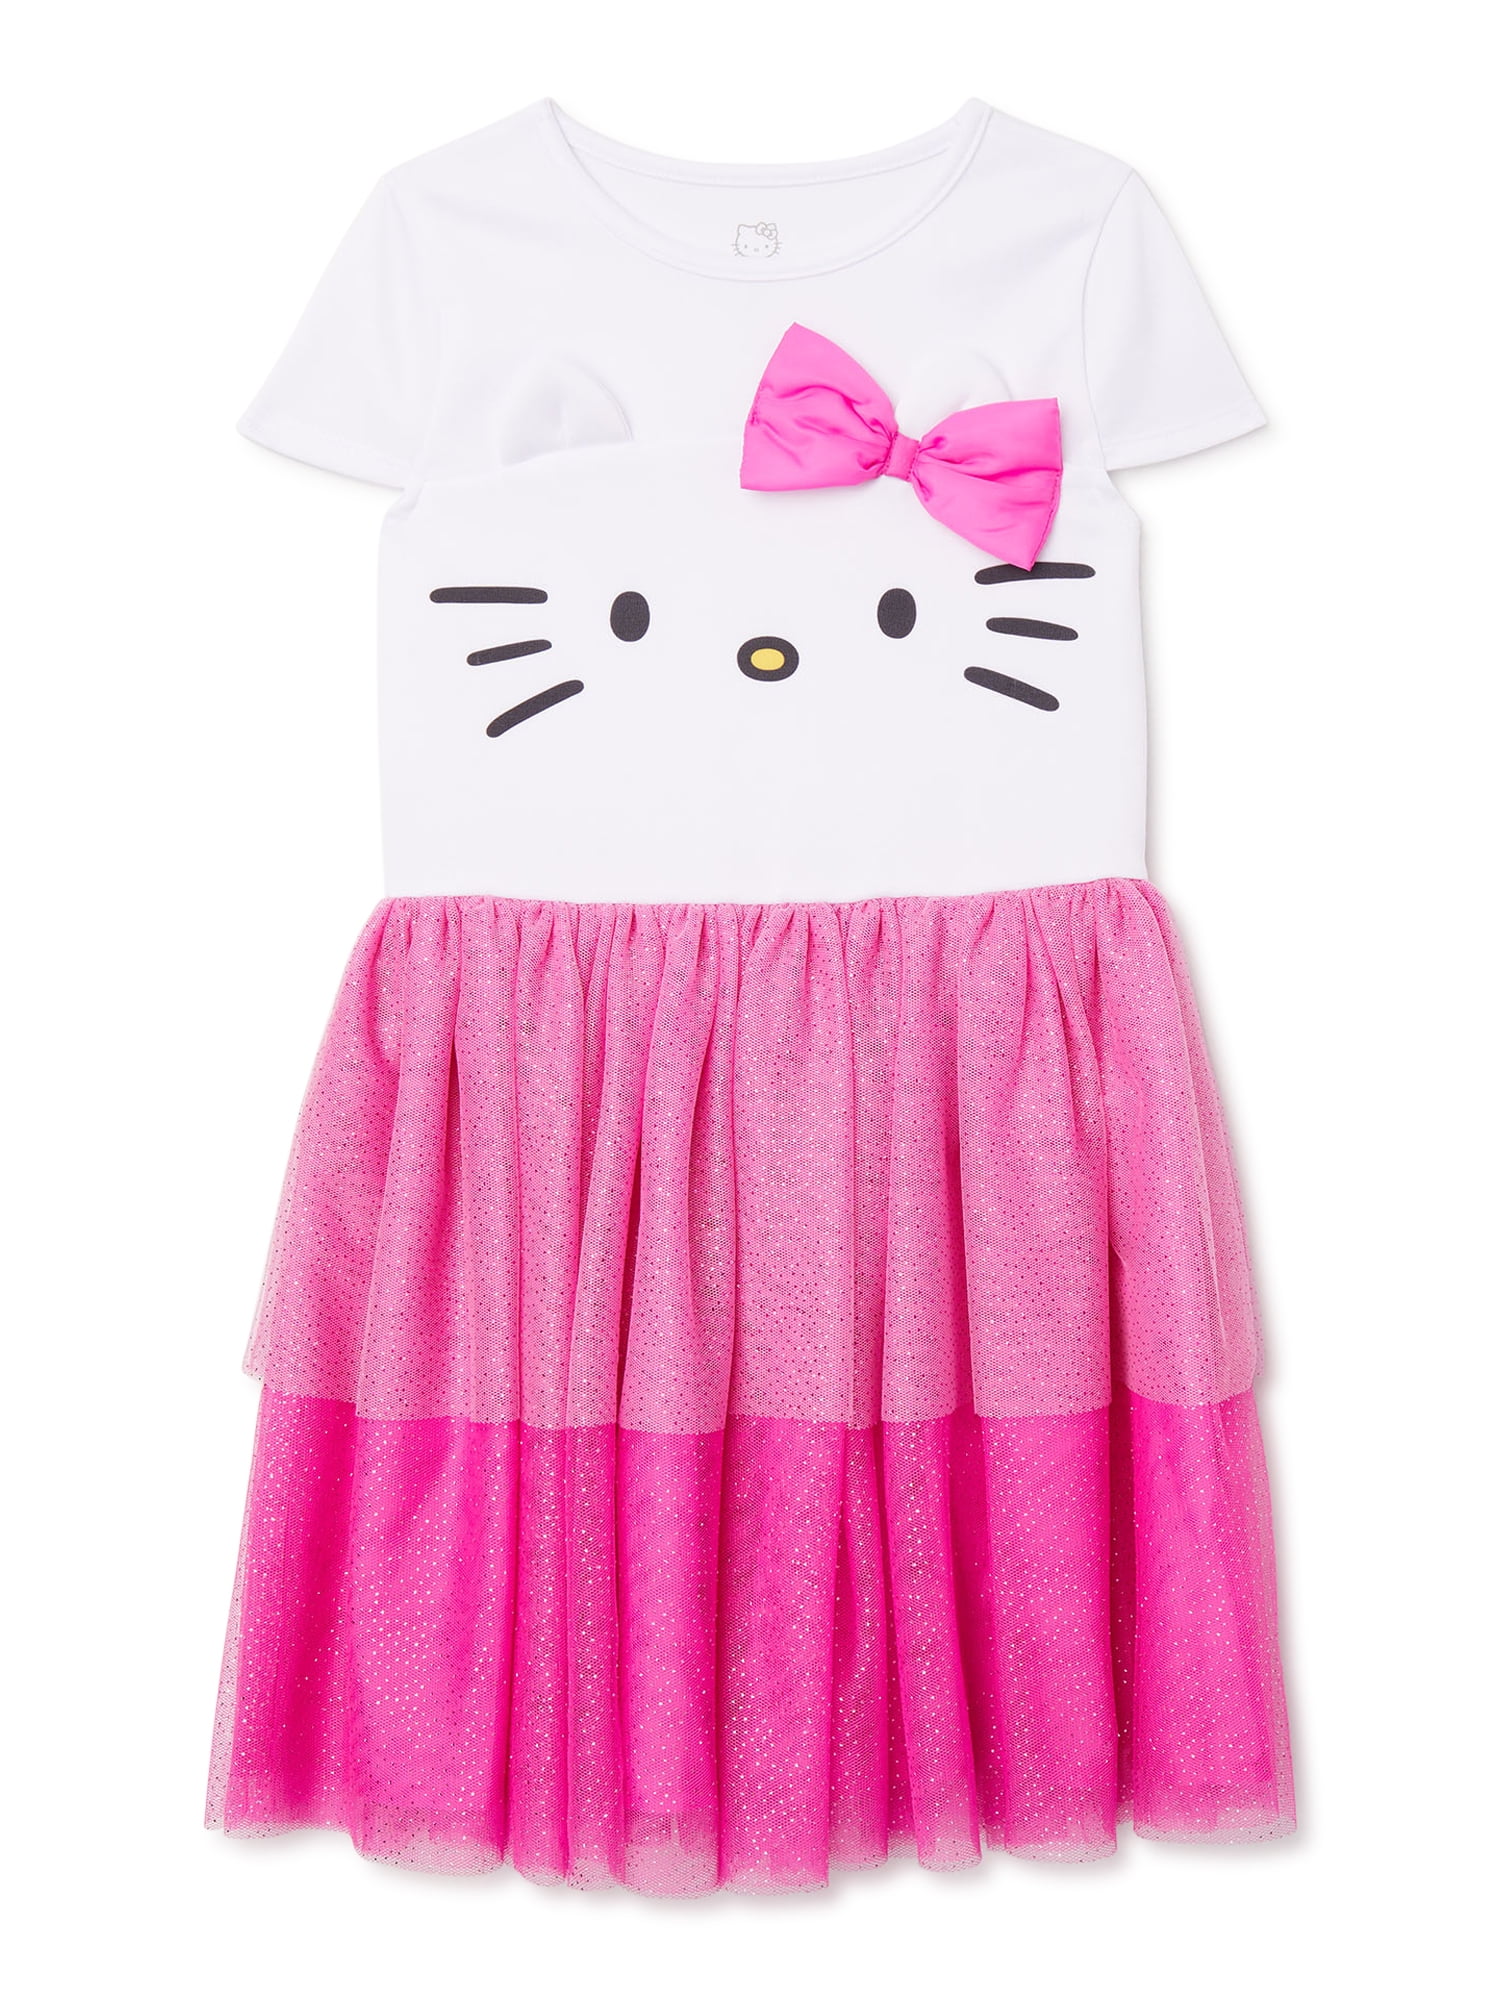 Girls New Hello Kitty Dress Kids Party A-line Cotton Pink White Age 4-10 Years 